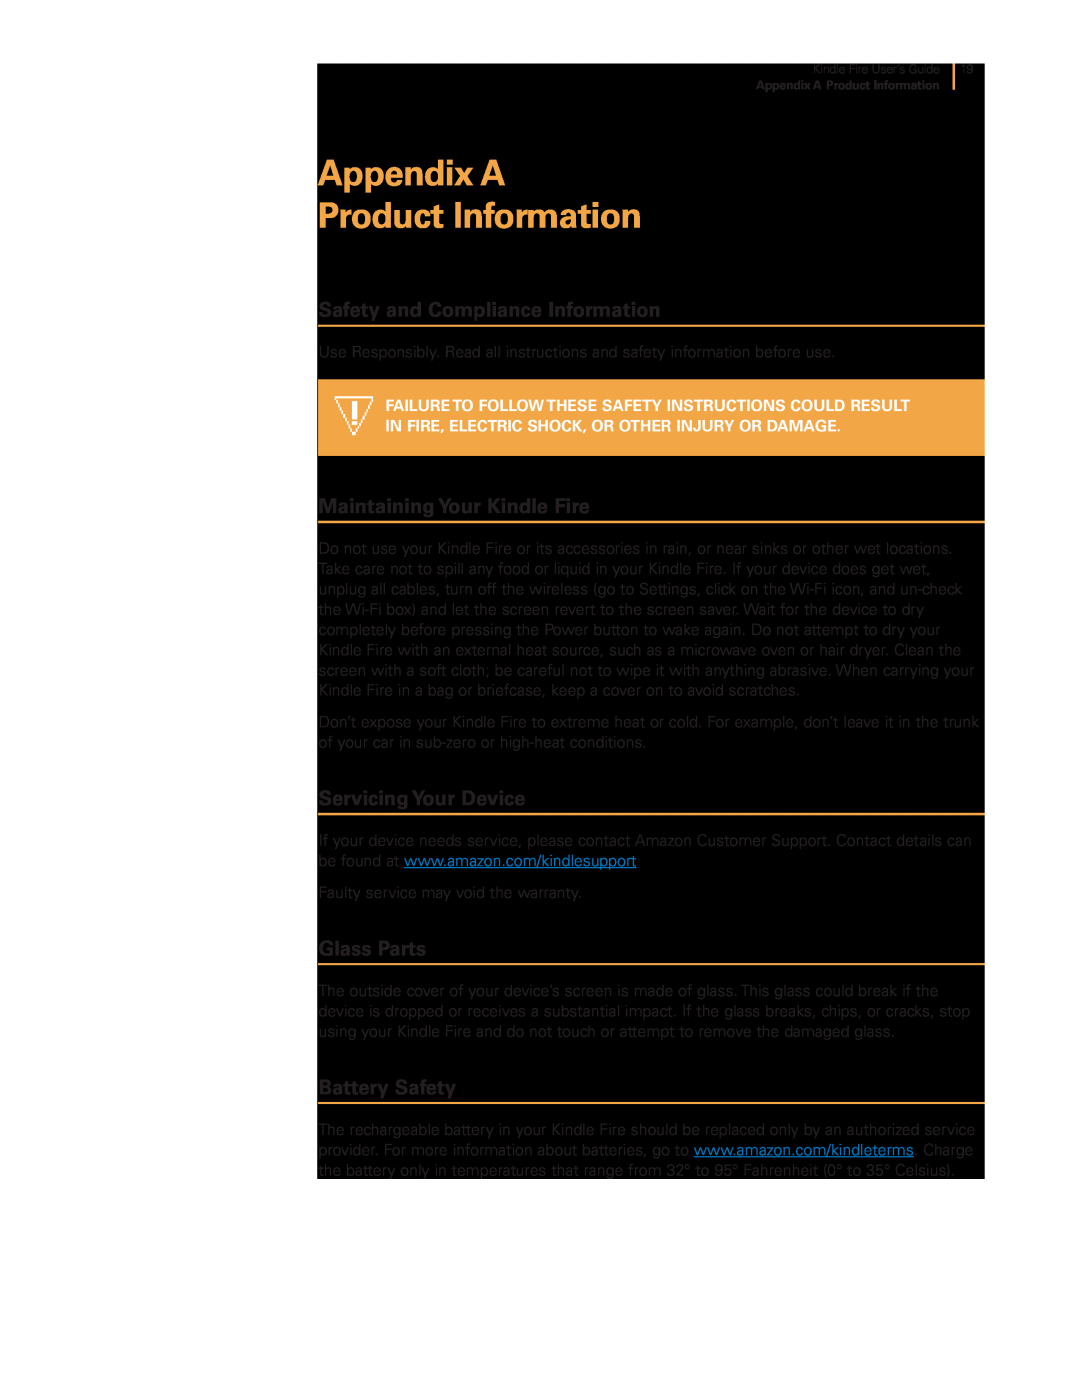 Amazon B008GFREAU manual Appendix A Product Information, Safety and Compliance Information, Maintaining Your Kindle Fire 